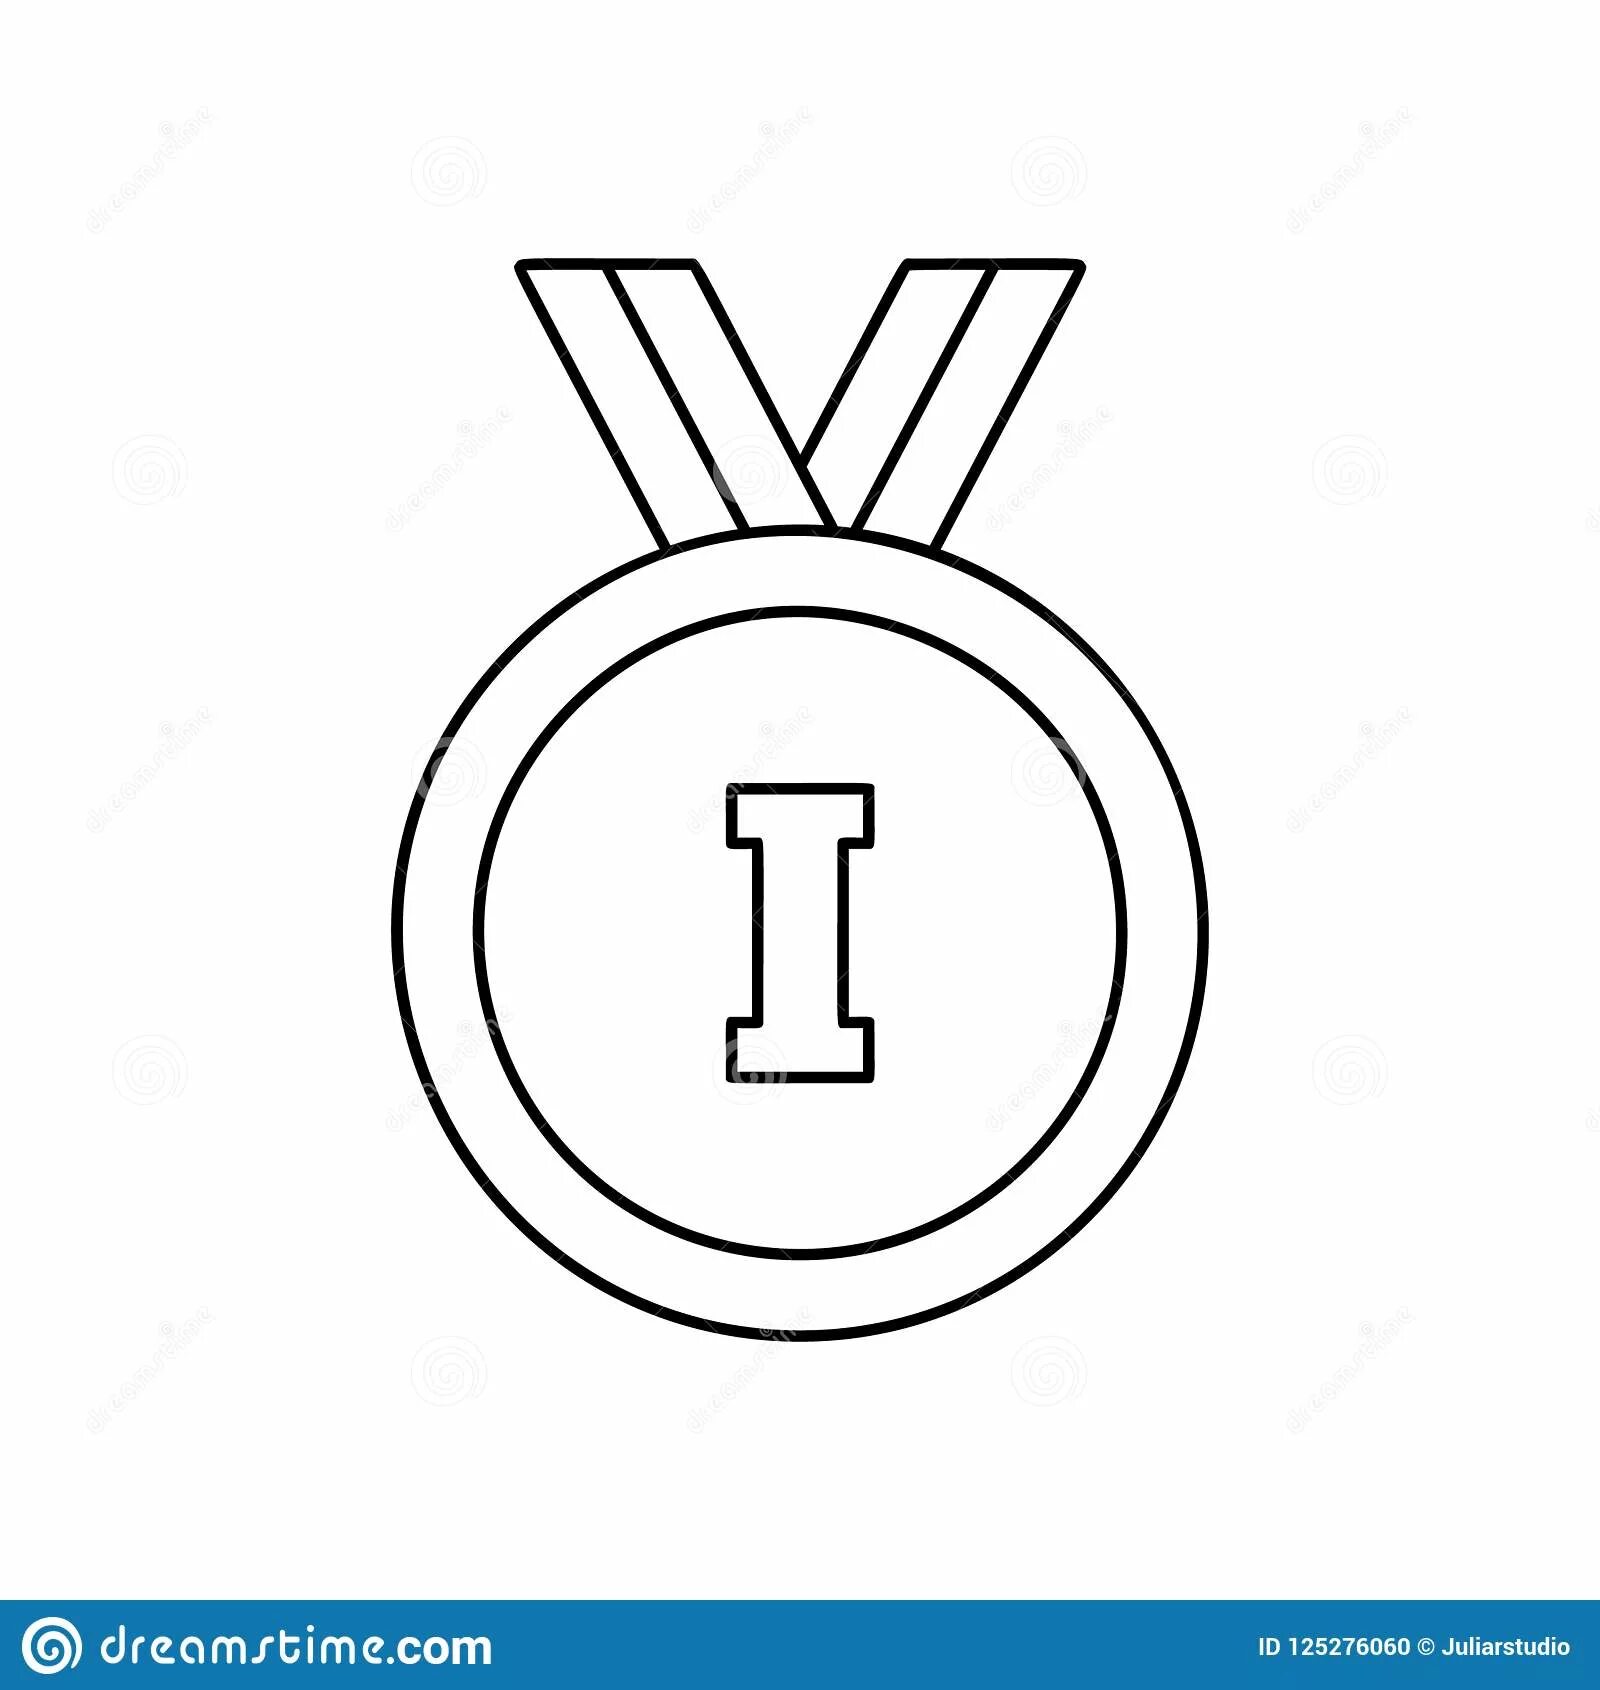 Fancy medal coloring page